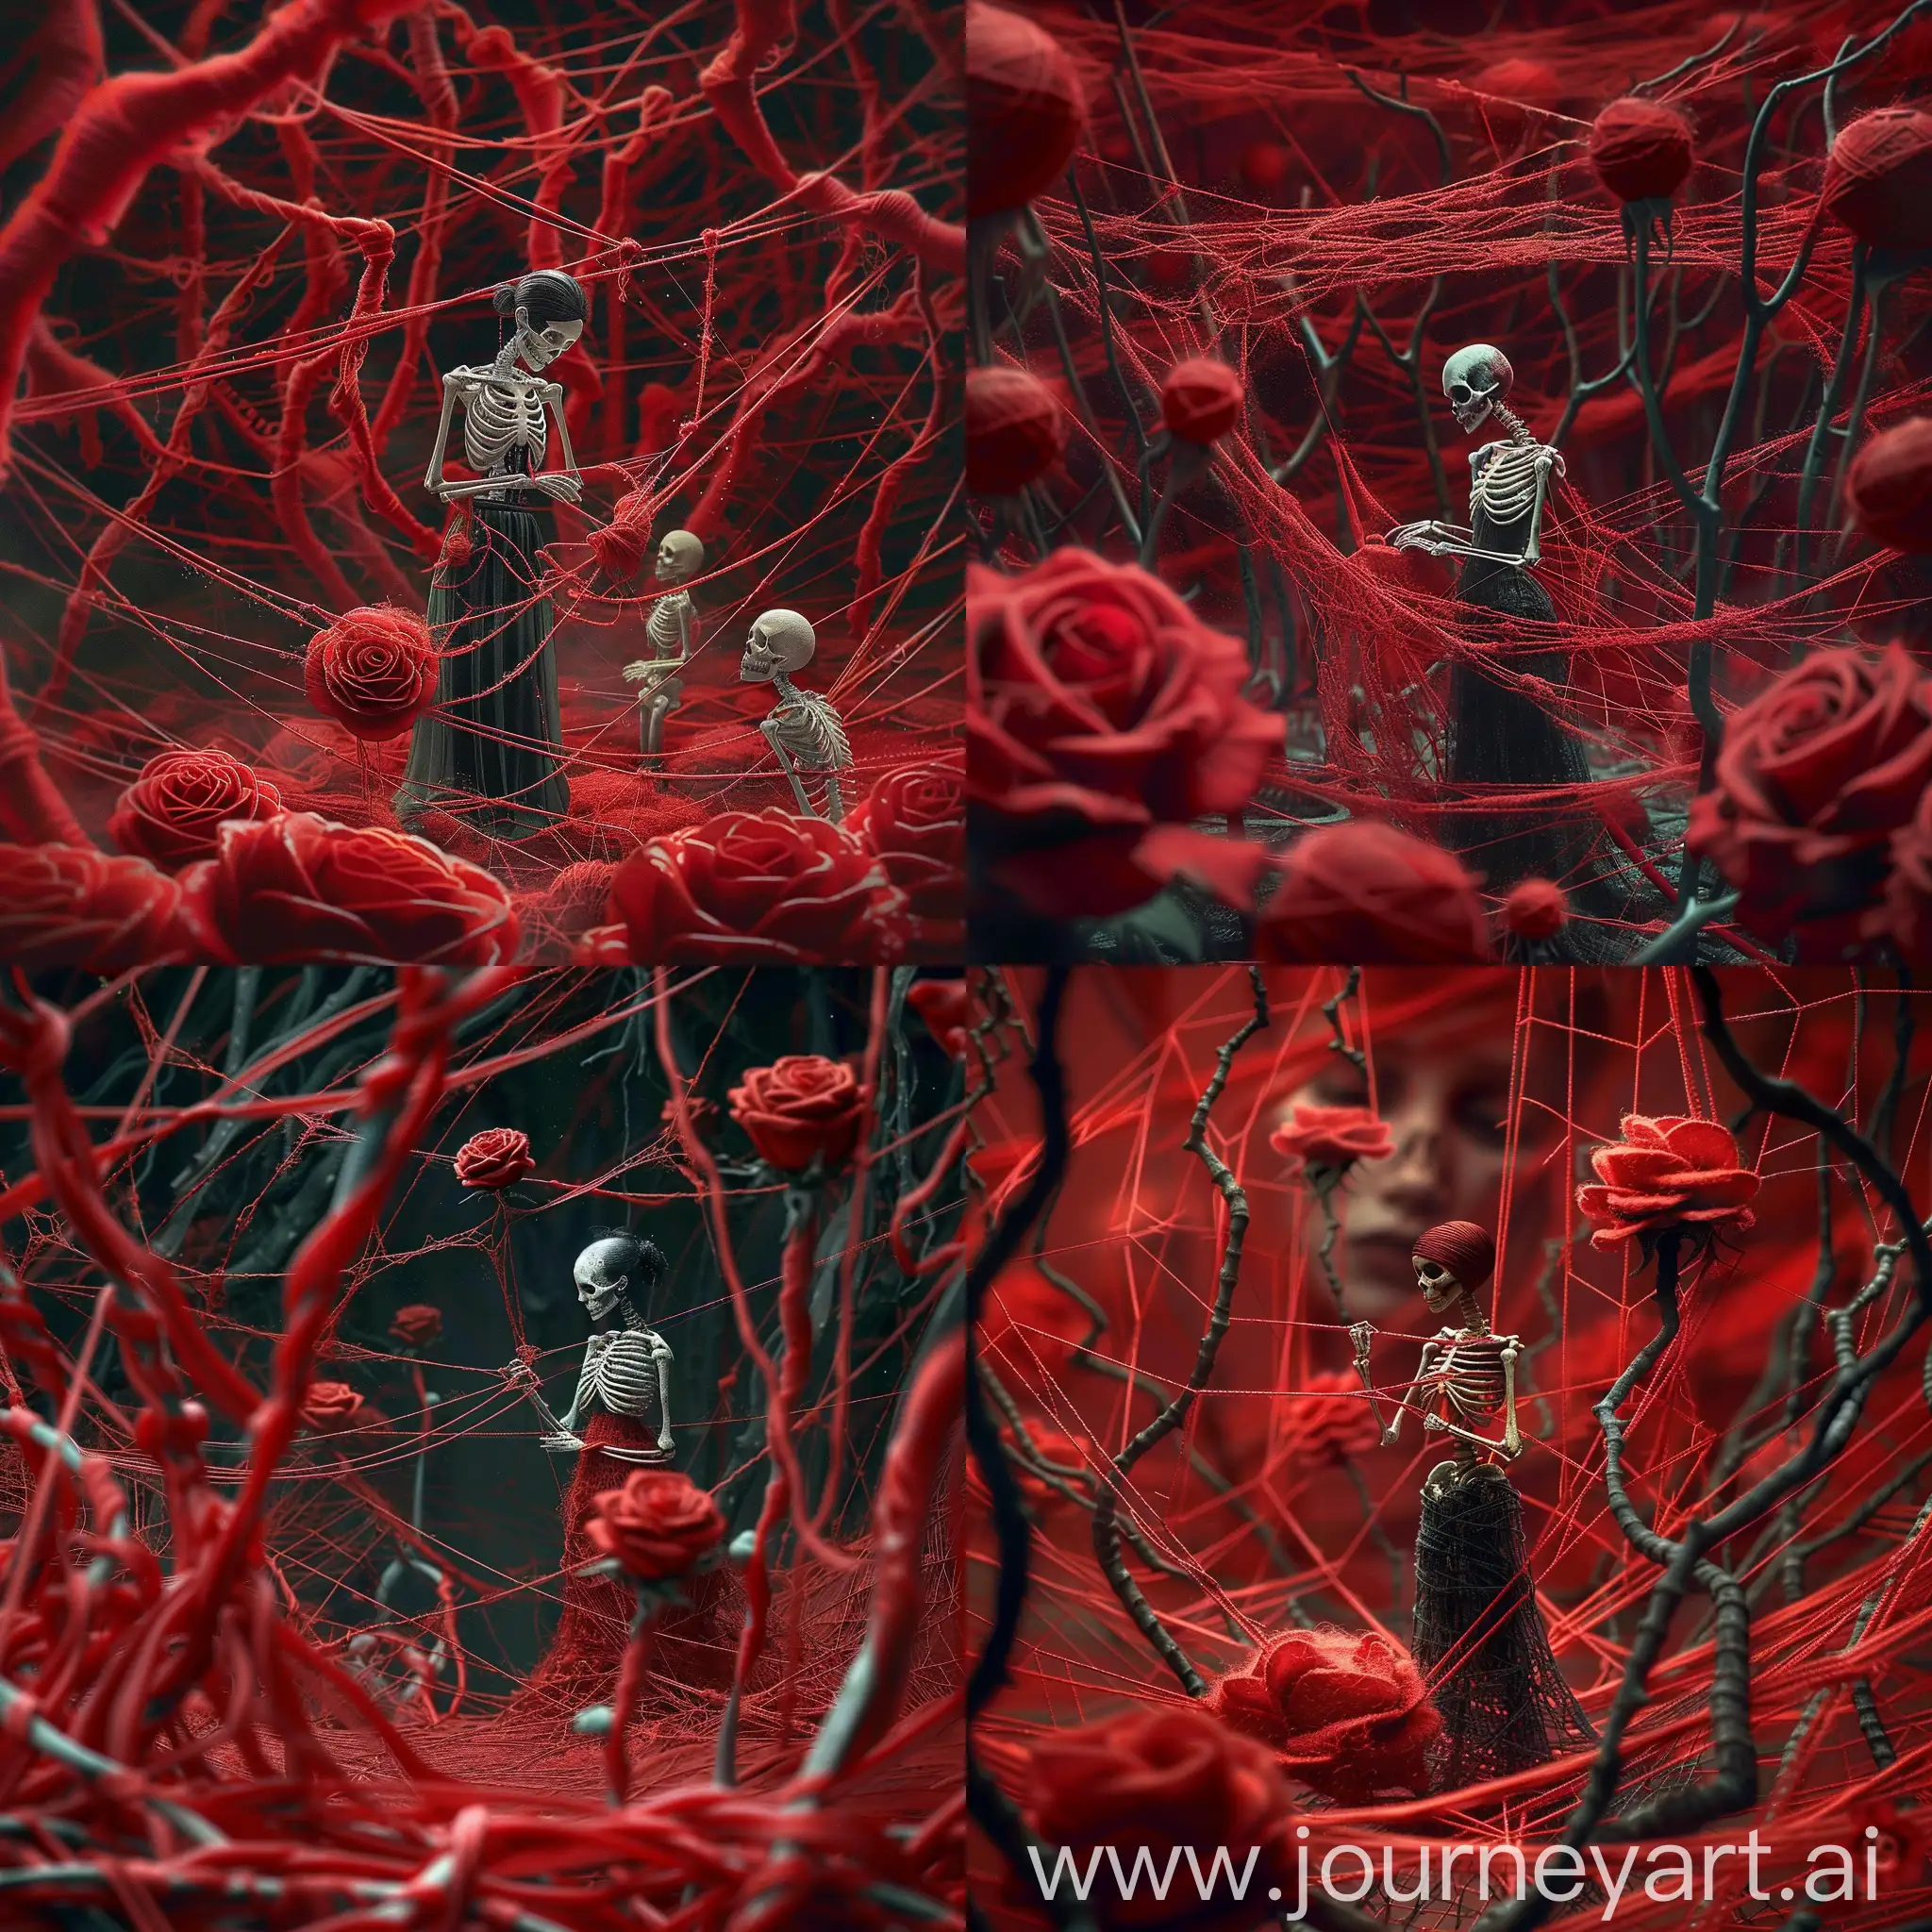 an image of a woman sewing from skeletons standing amidst a complex web of red strings. The strings should be intricately woven around and in front of the person, creating a sense of entanglement. The background should be emphasize the web of red liquid strings. some woven wovens into little rose The overall style should be aesthetic and capture the dynamic and slightly chaotic feel, photo realistic face, in the dark forest, from wool rose to real rose